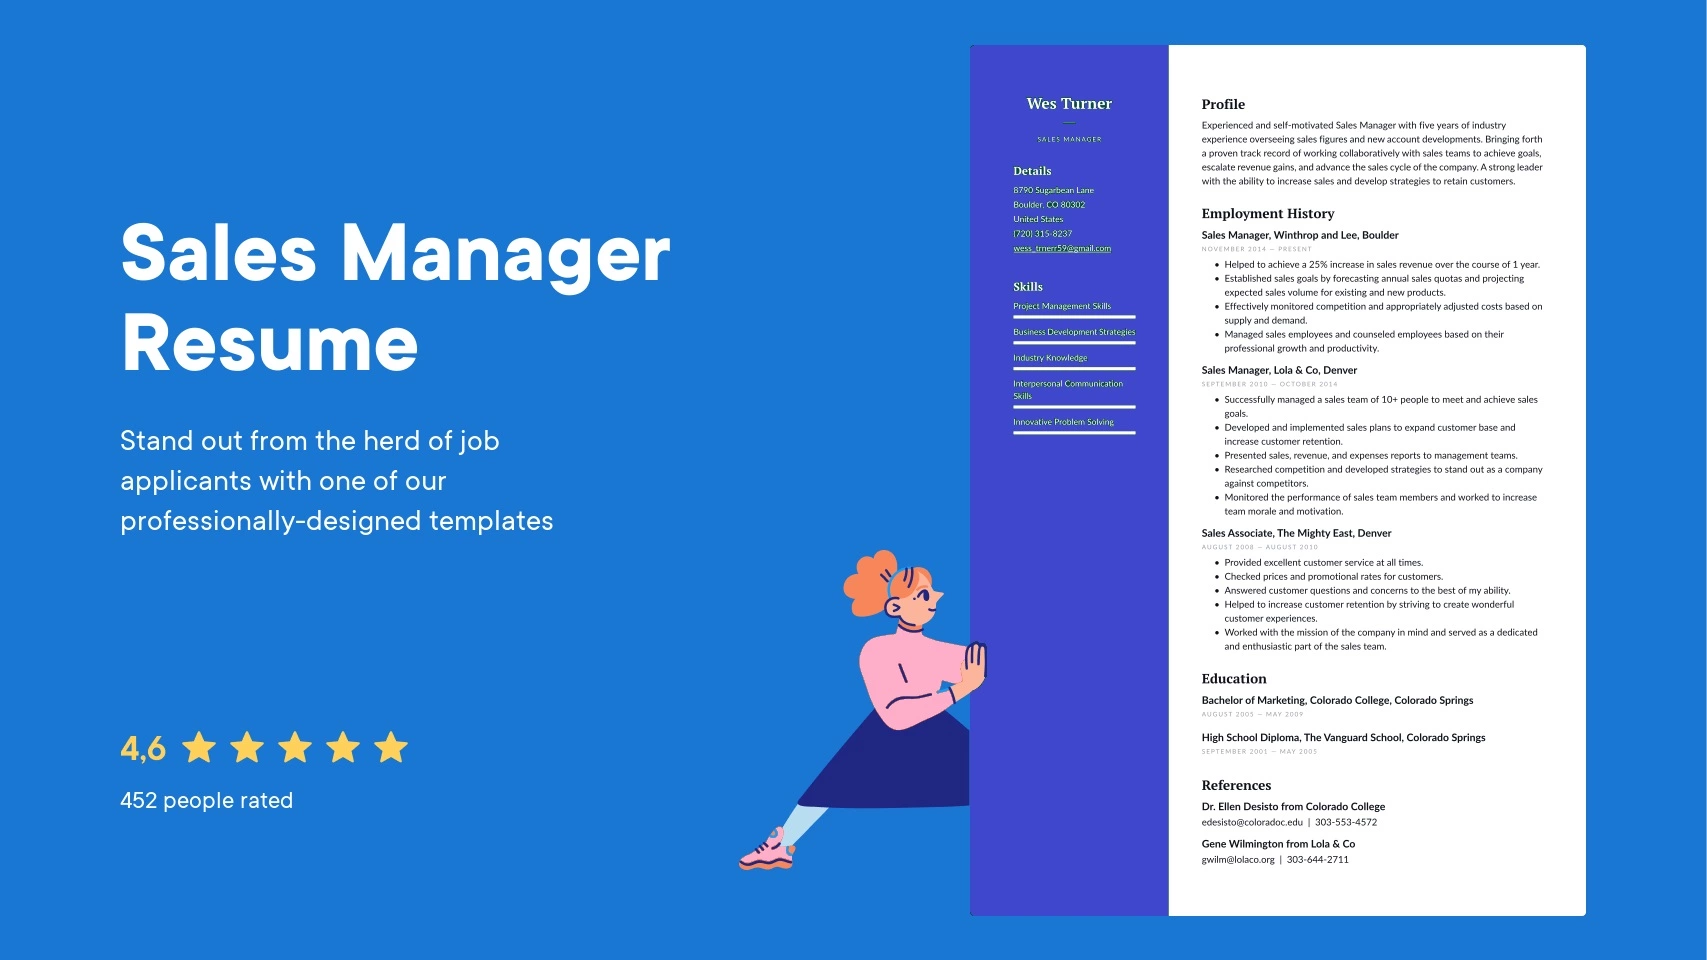 Crafting the Perfect Sales Manager Resume: Tips and Tricks